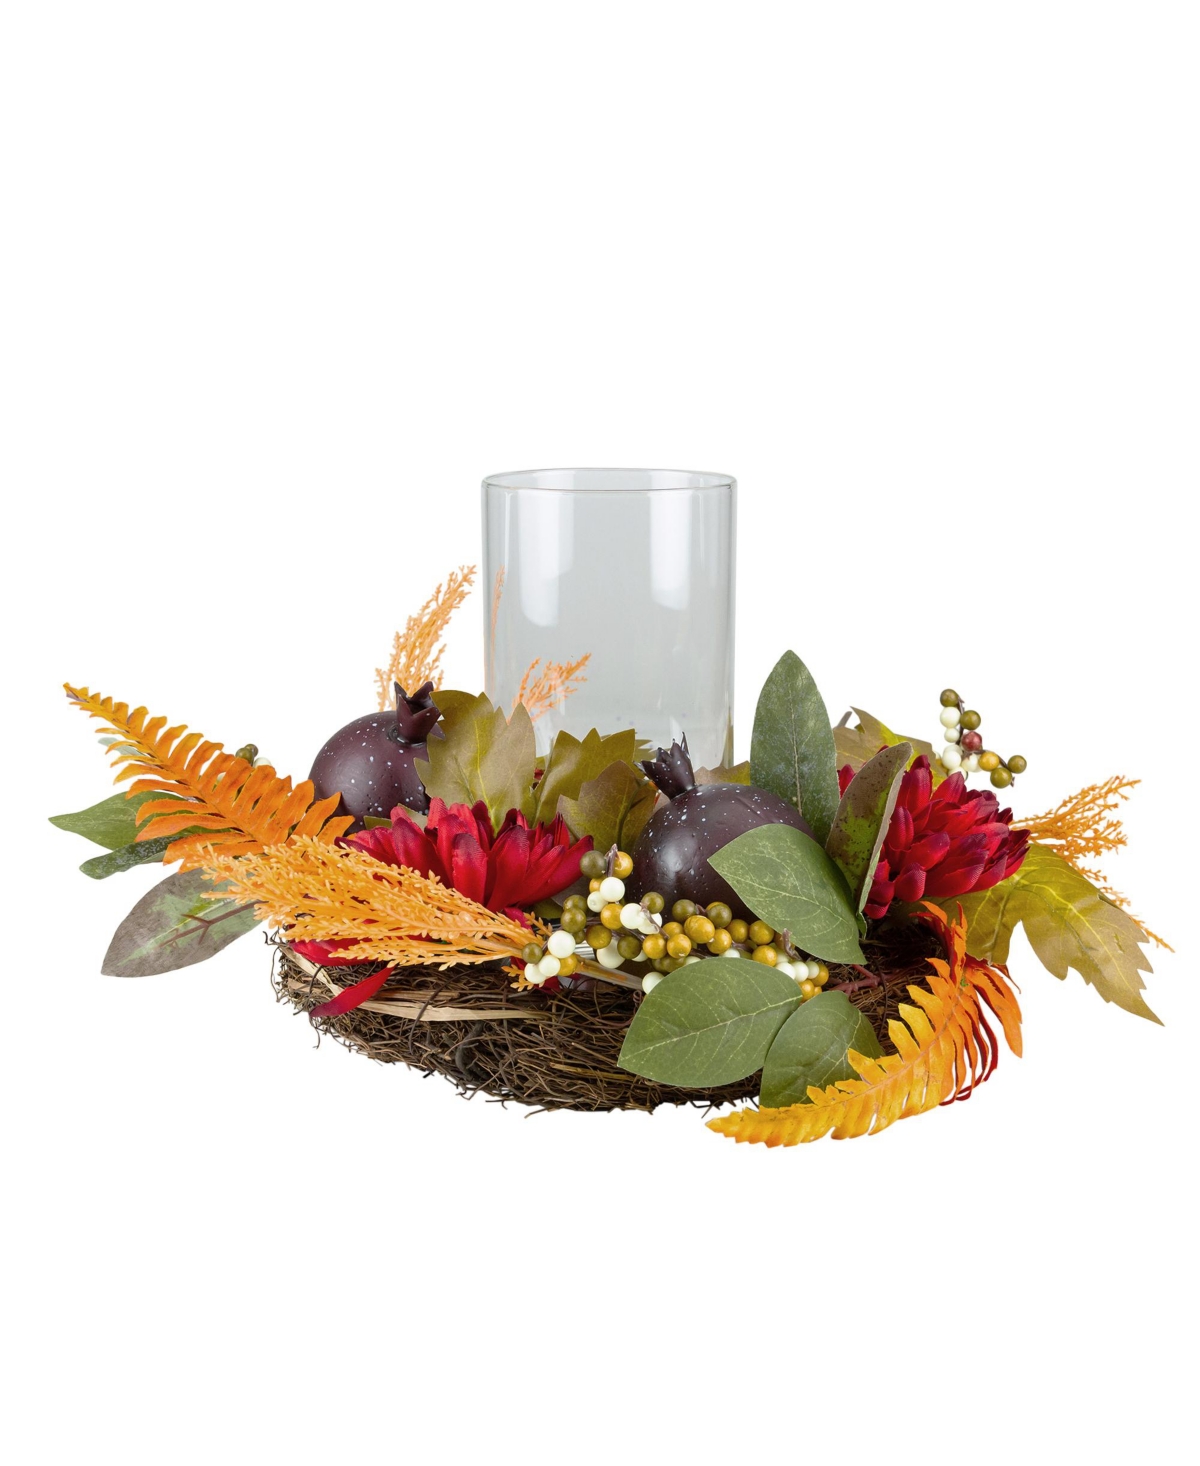 Mums with Pomegranate Fall Candle Holder Centerpiece, 22" - Red